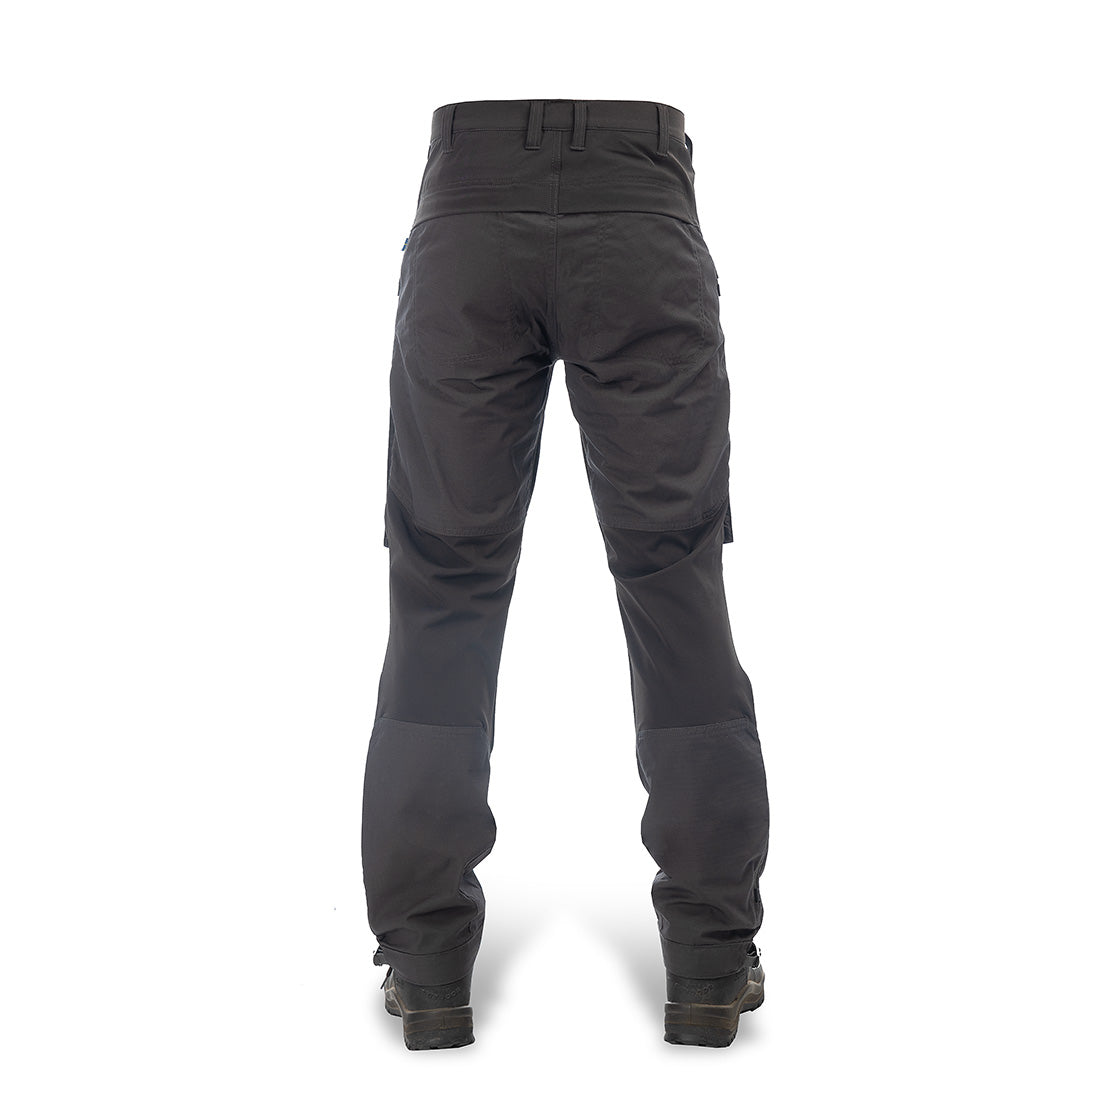 Explore in Style: Outback Pant Men (Anthracite) - Versatile Hiking